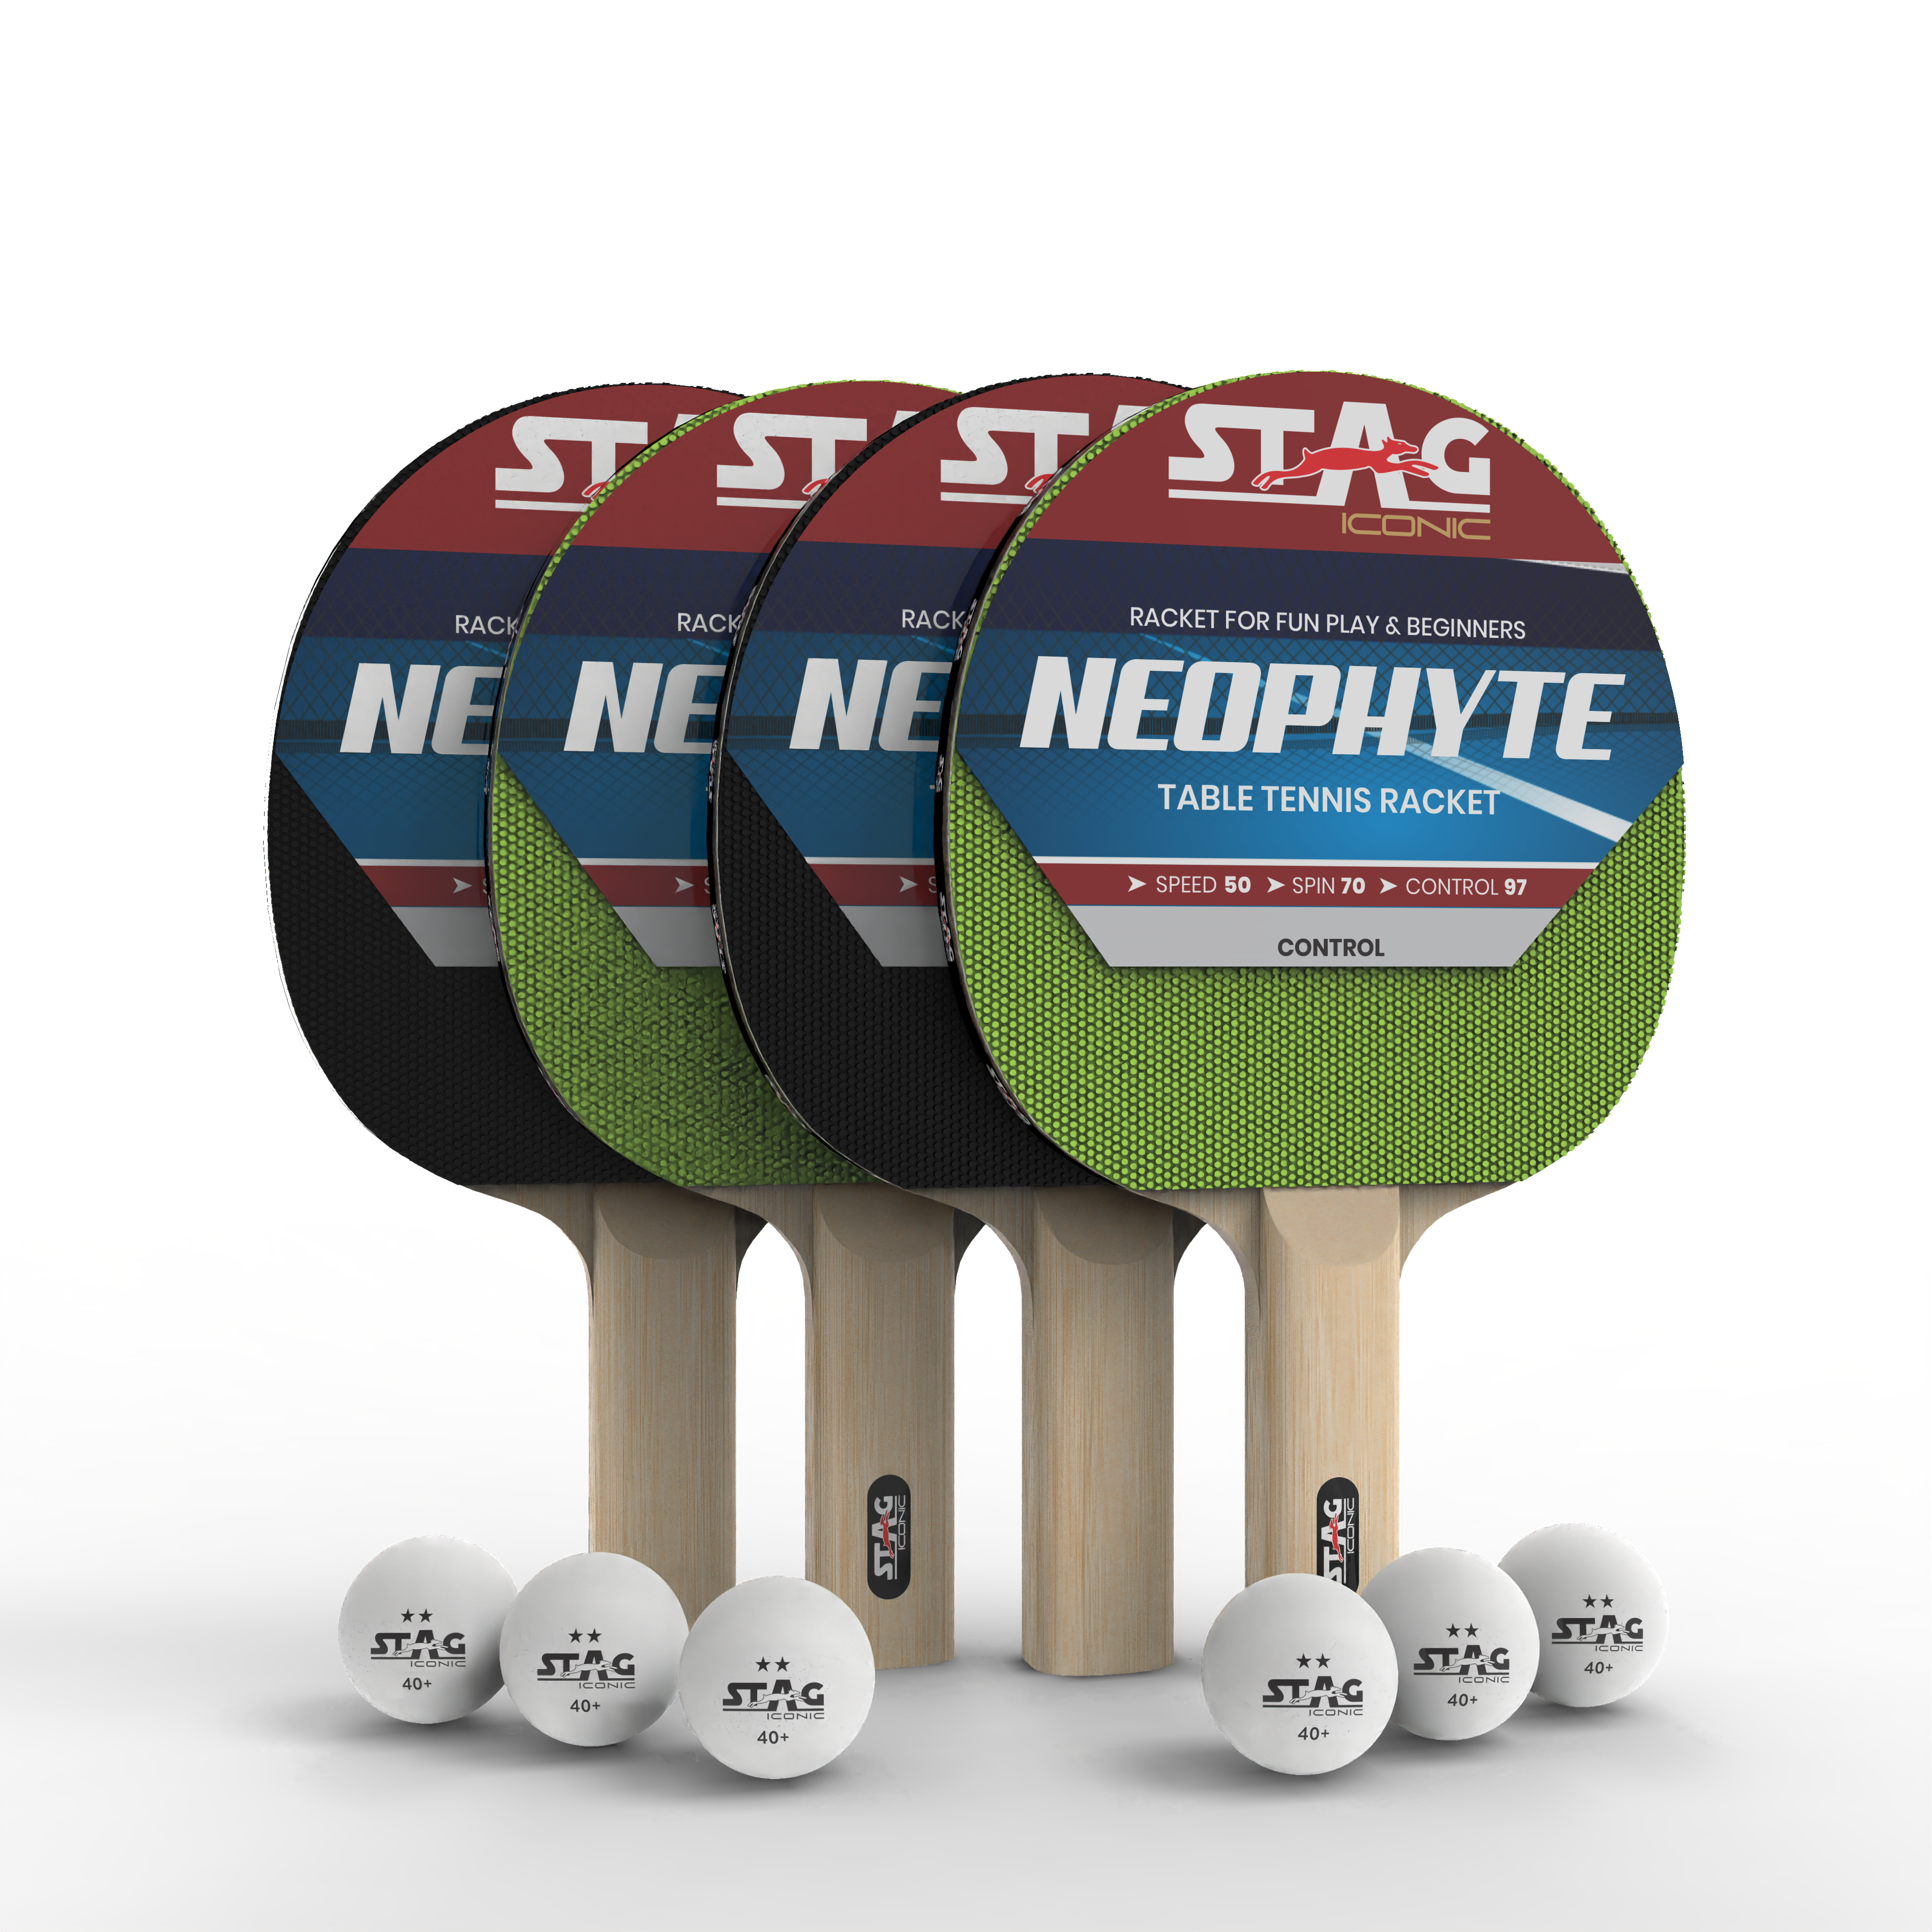 Stag Iconic 2024 Neophyte Series Table Tennis | Beginner Play Series T.T Series | Jump into Action with Vibrant, Playful Ping-Pop Colors| Discover Your Element in Table Tennis